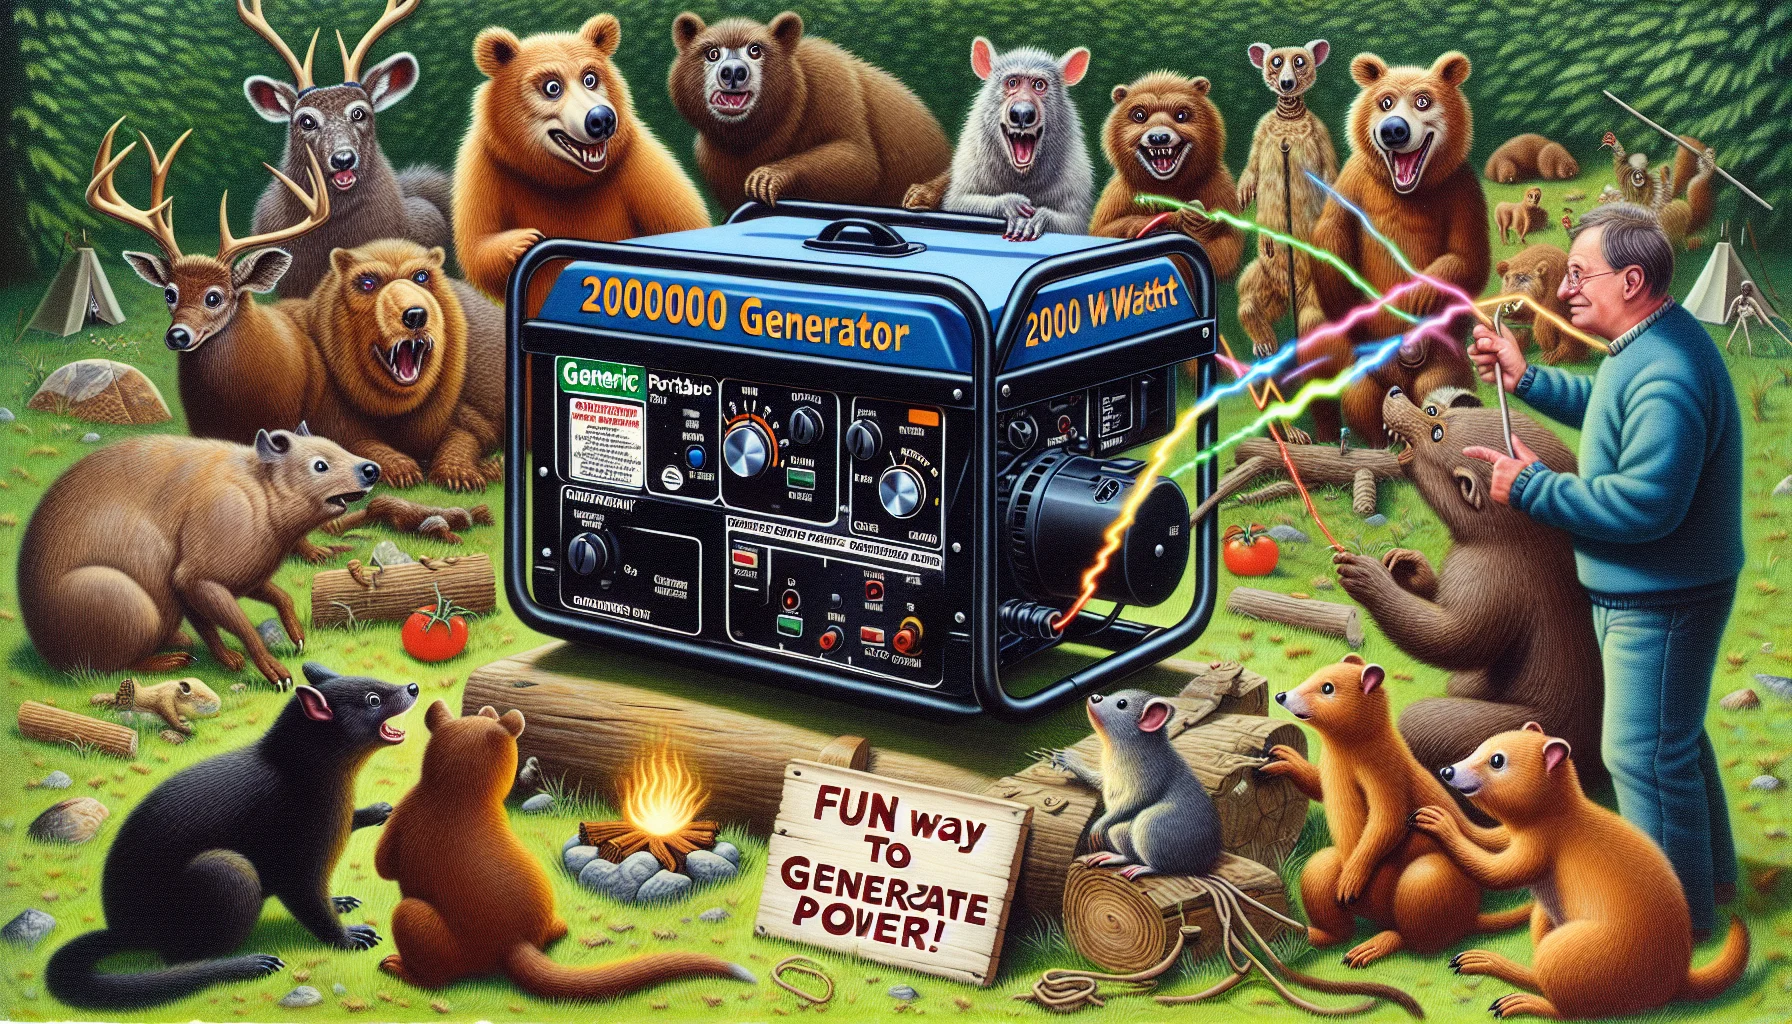 Imagine an amusing scenario featuring a generic portable 2000 watt generator. Visualize it situated in the outdoors, perhaps in a camping context. Surround it by a group of animated woodland creatures, curiously poking and prodding the generator. Emphasize the humour by portraying the animals with human-like expressions of fascination, bemusement, and hilarity. Be sure to highlight the generator producing colourful and crazy light beams, symbolically representing electricity. Put a sign that reads 'Fun way to generate power!' in the foreground, emphasizing the enticing aspect of electricity generation.